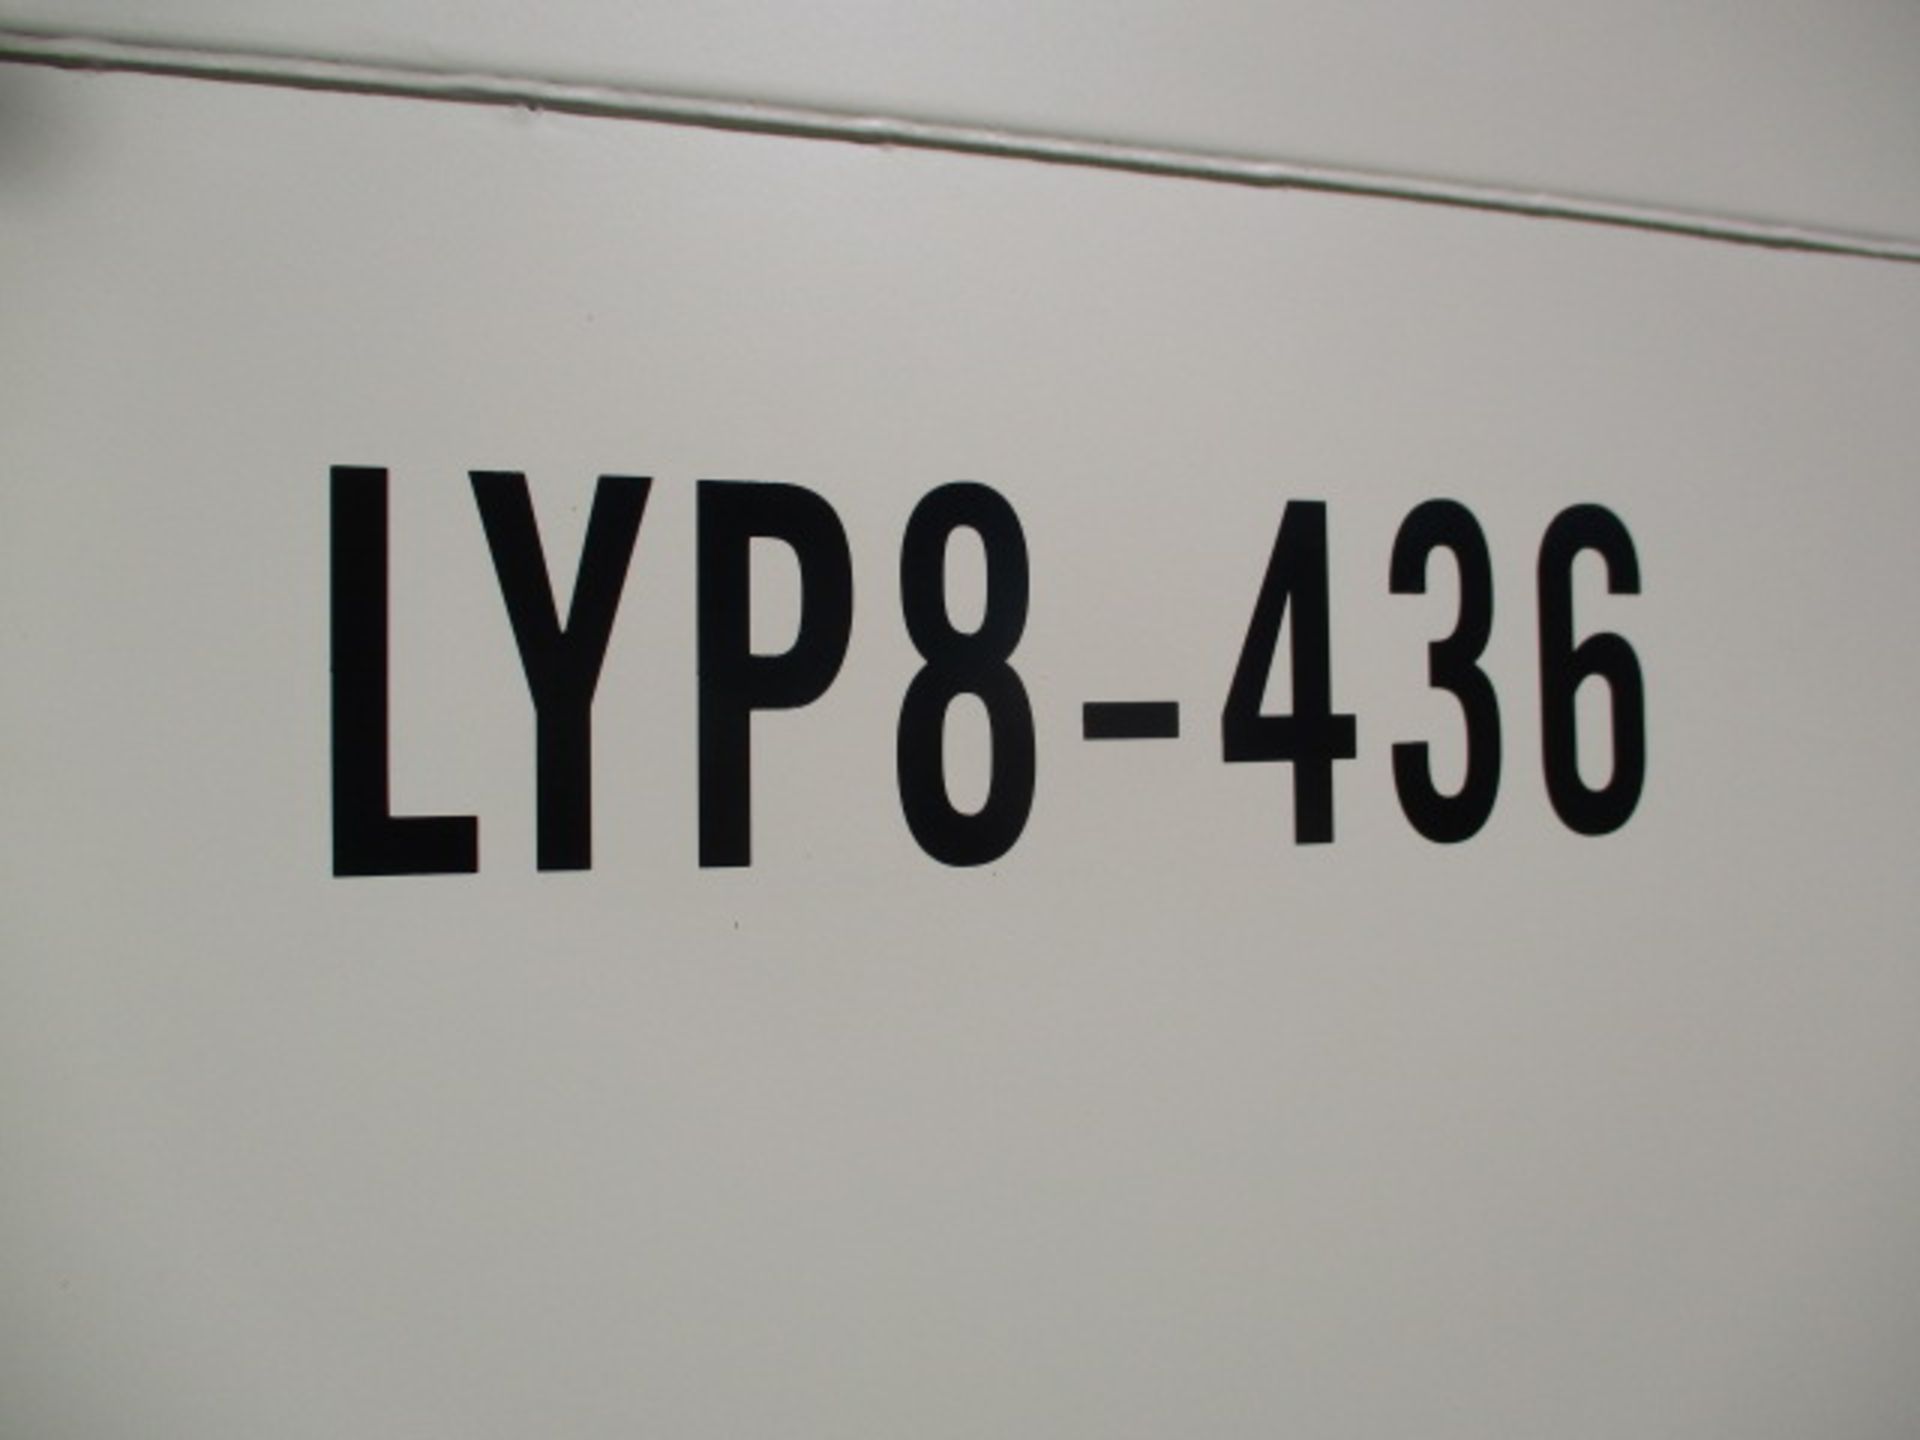 Unused 8' Portable Office Container, S/N: LYP8-436 - Image 23 of 24